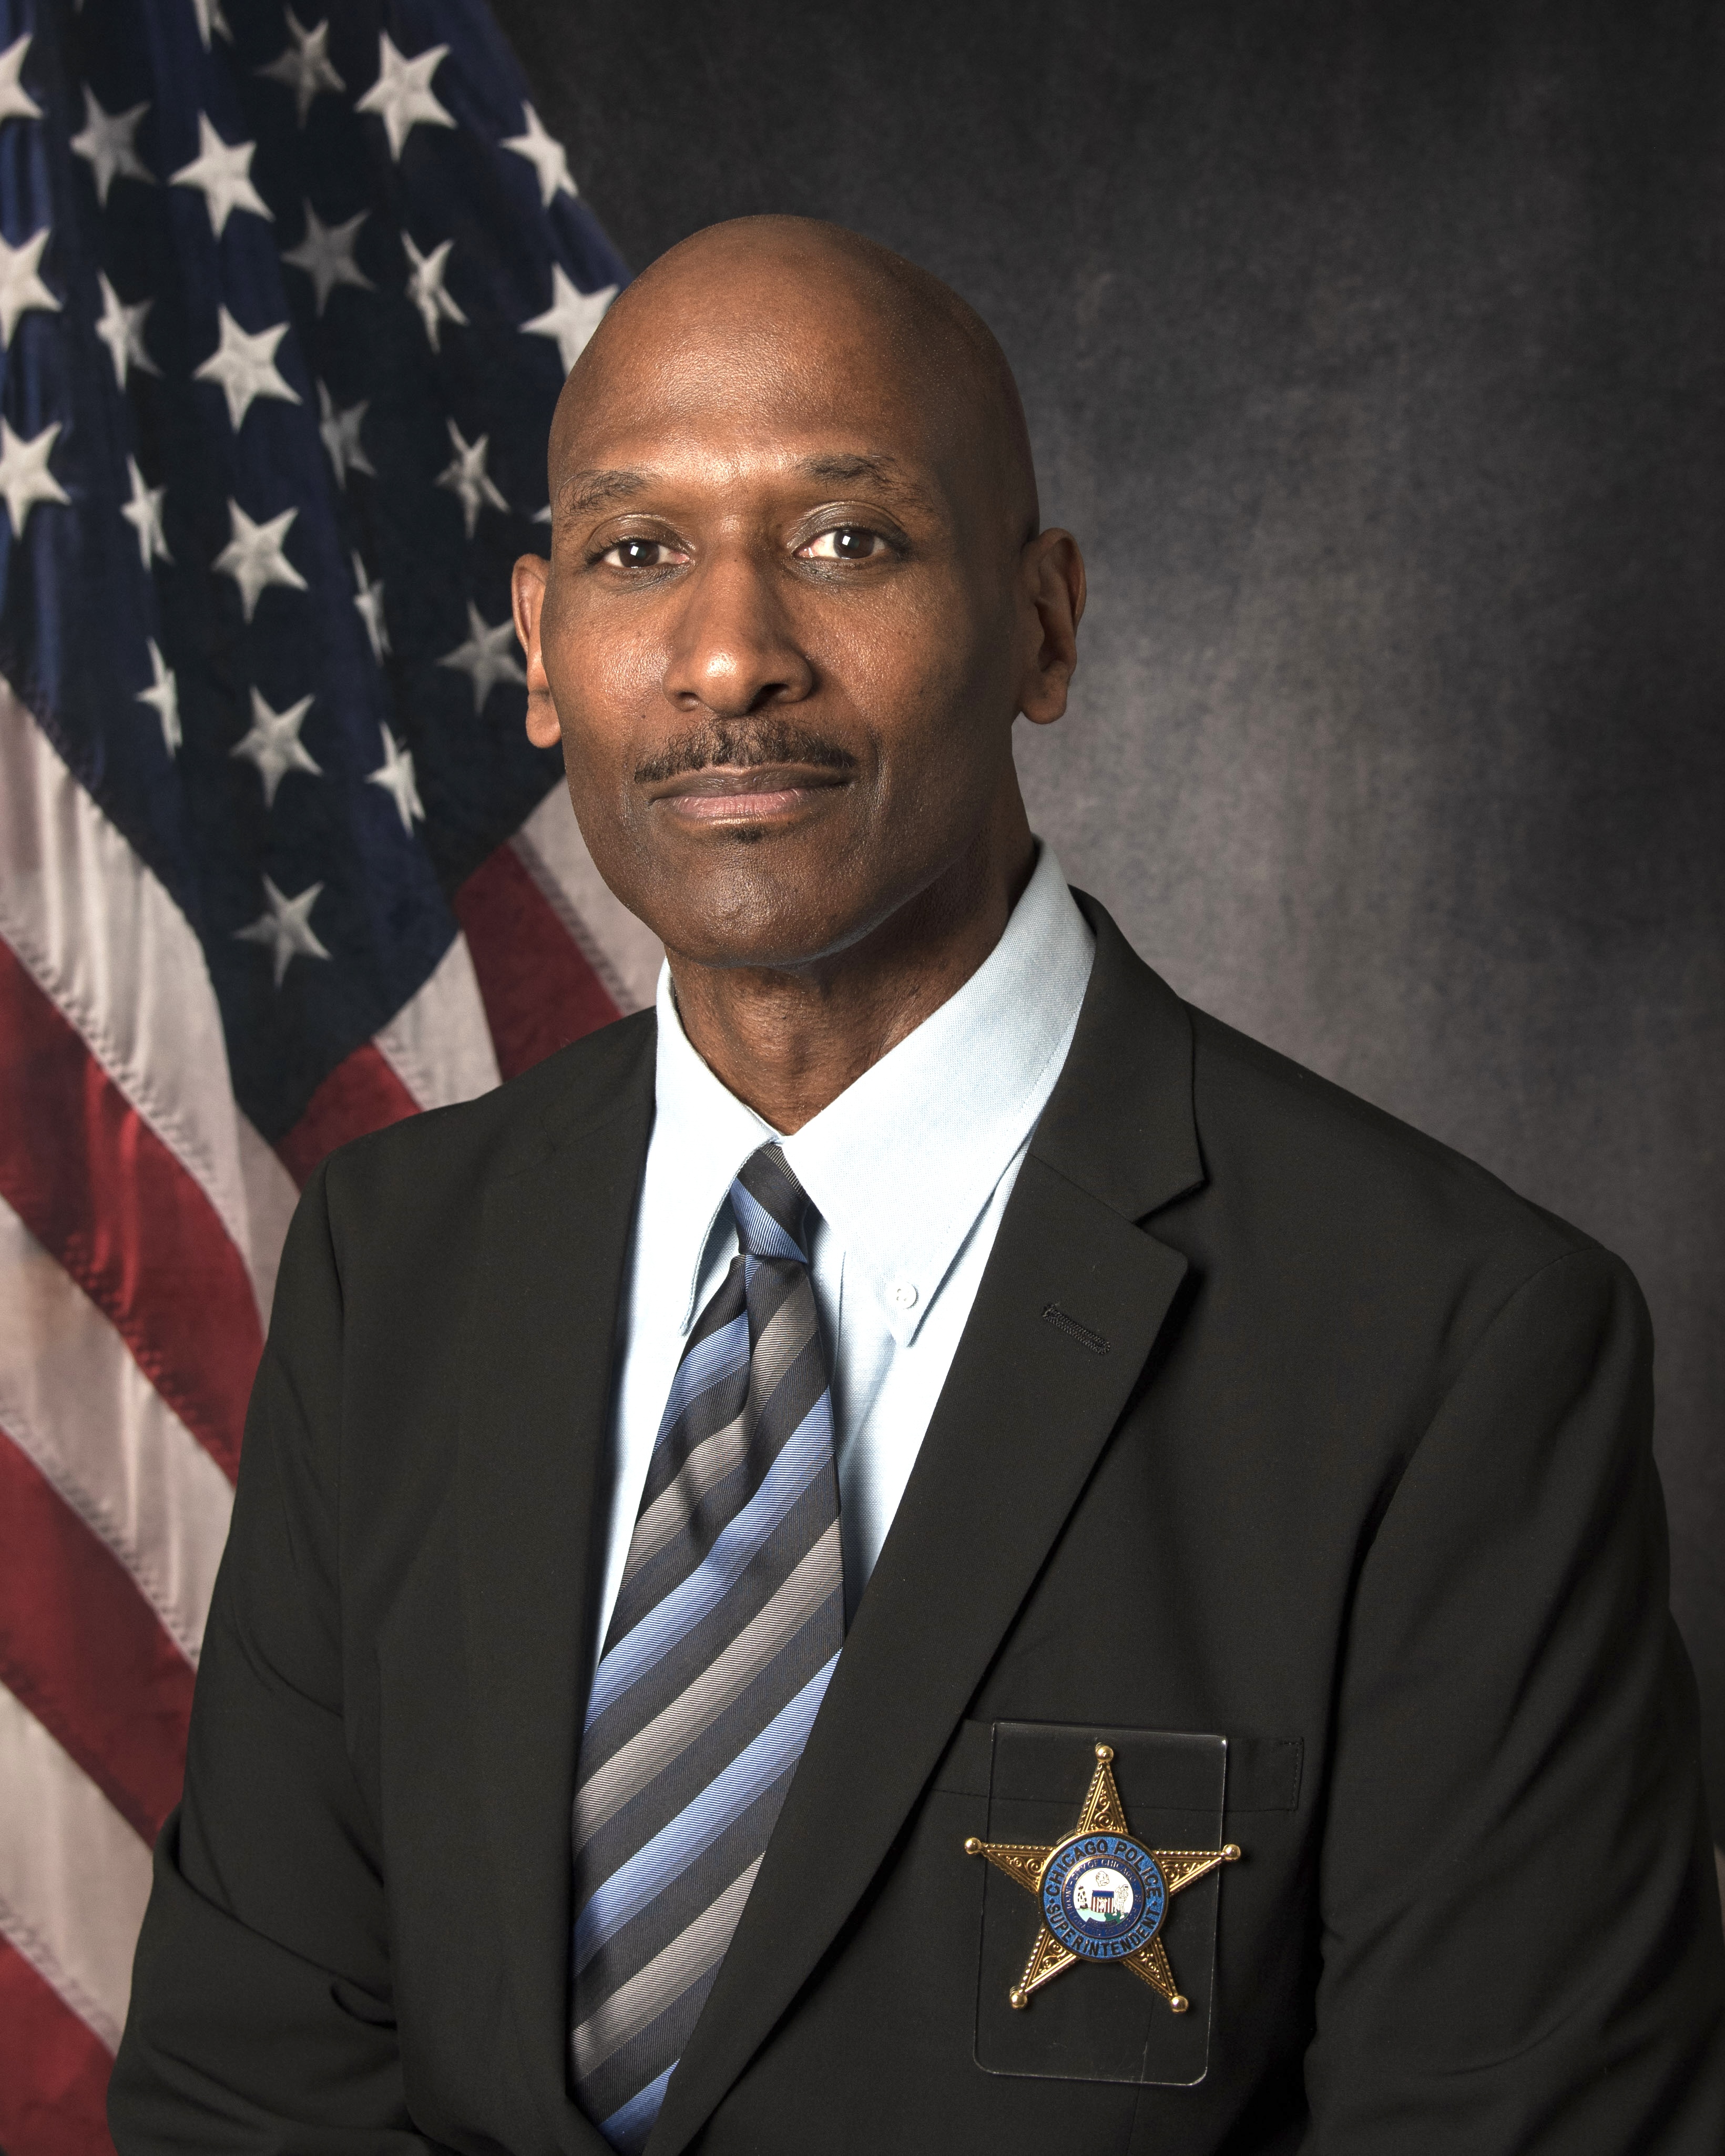 Interim Superintendent of Police Fred Waller